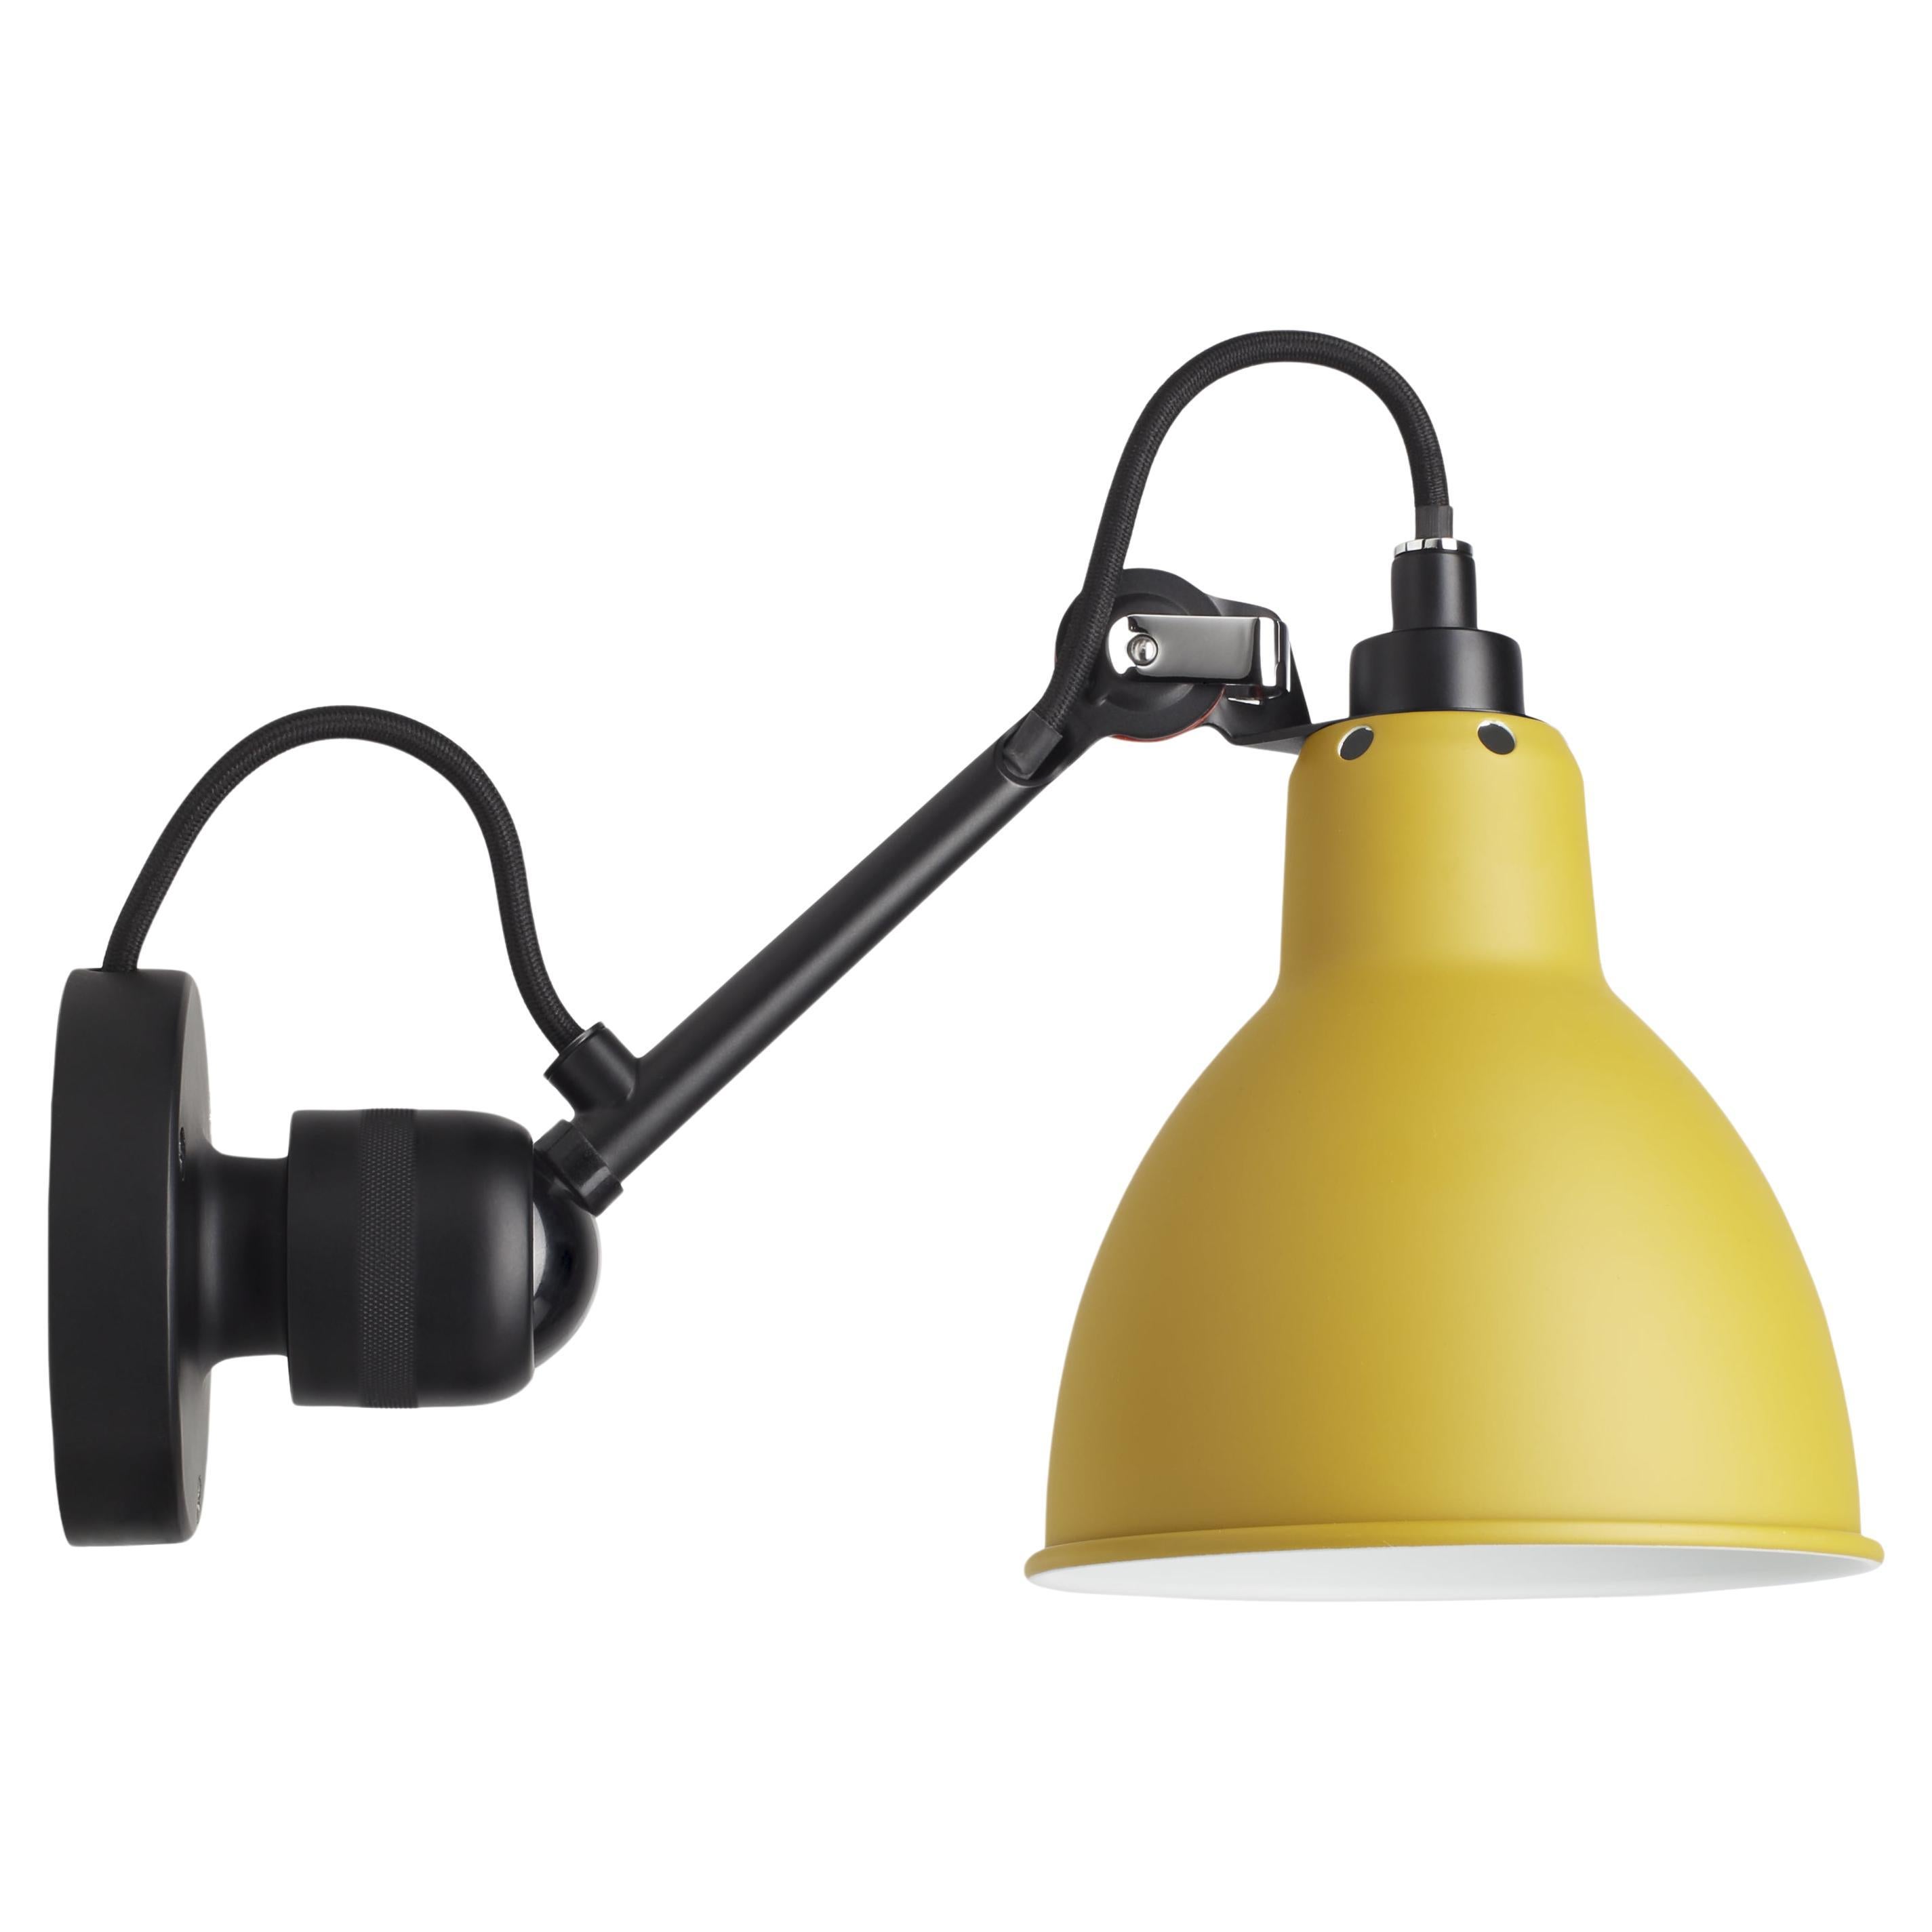 DCW Editions La Lampe Gras N°304 Wall Lamp in Black Arm and Yellow Shade For Sale